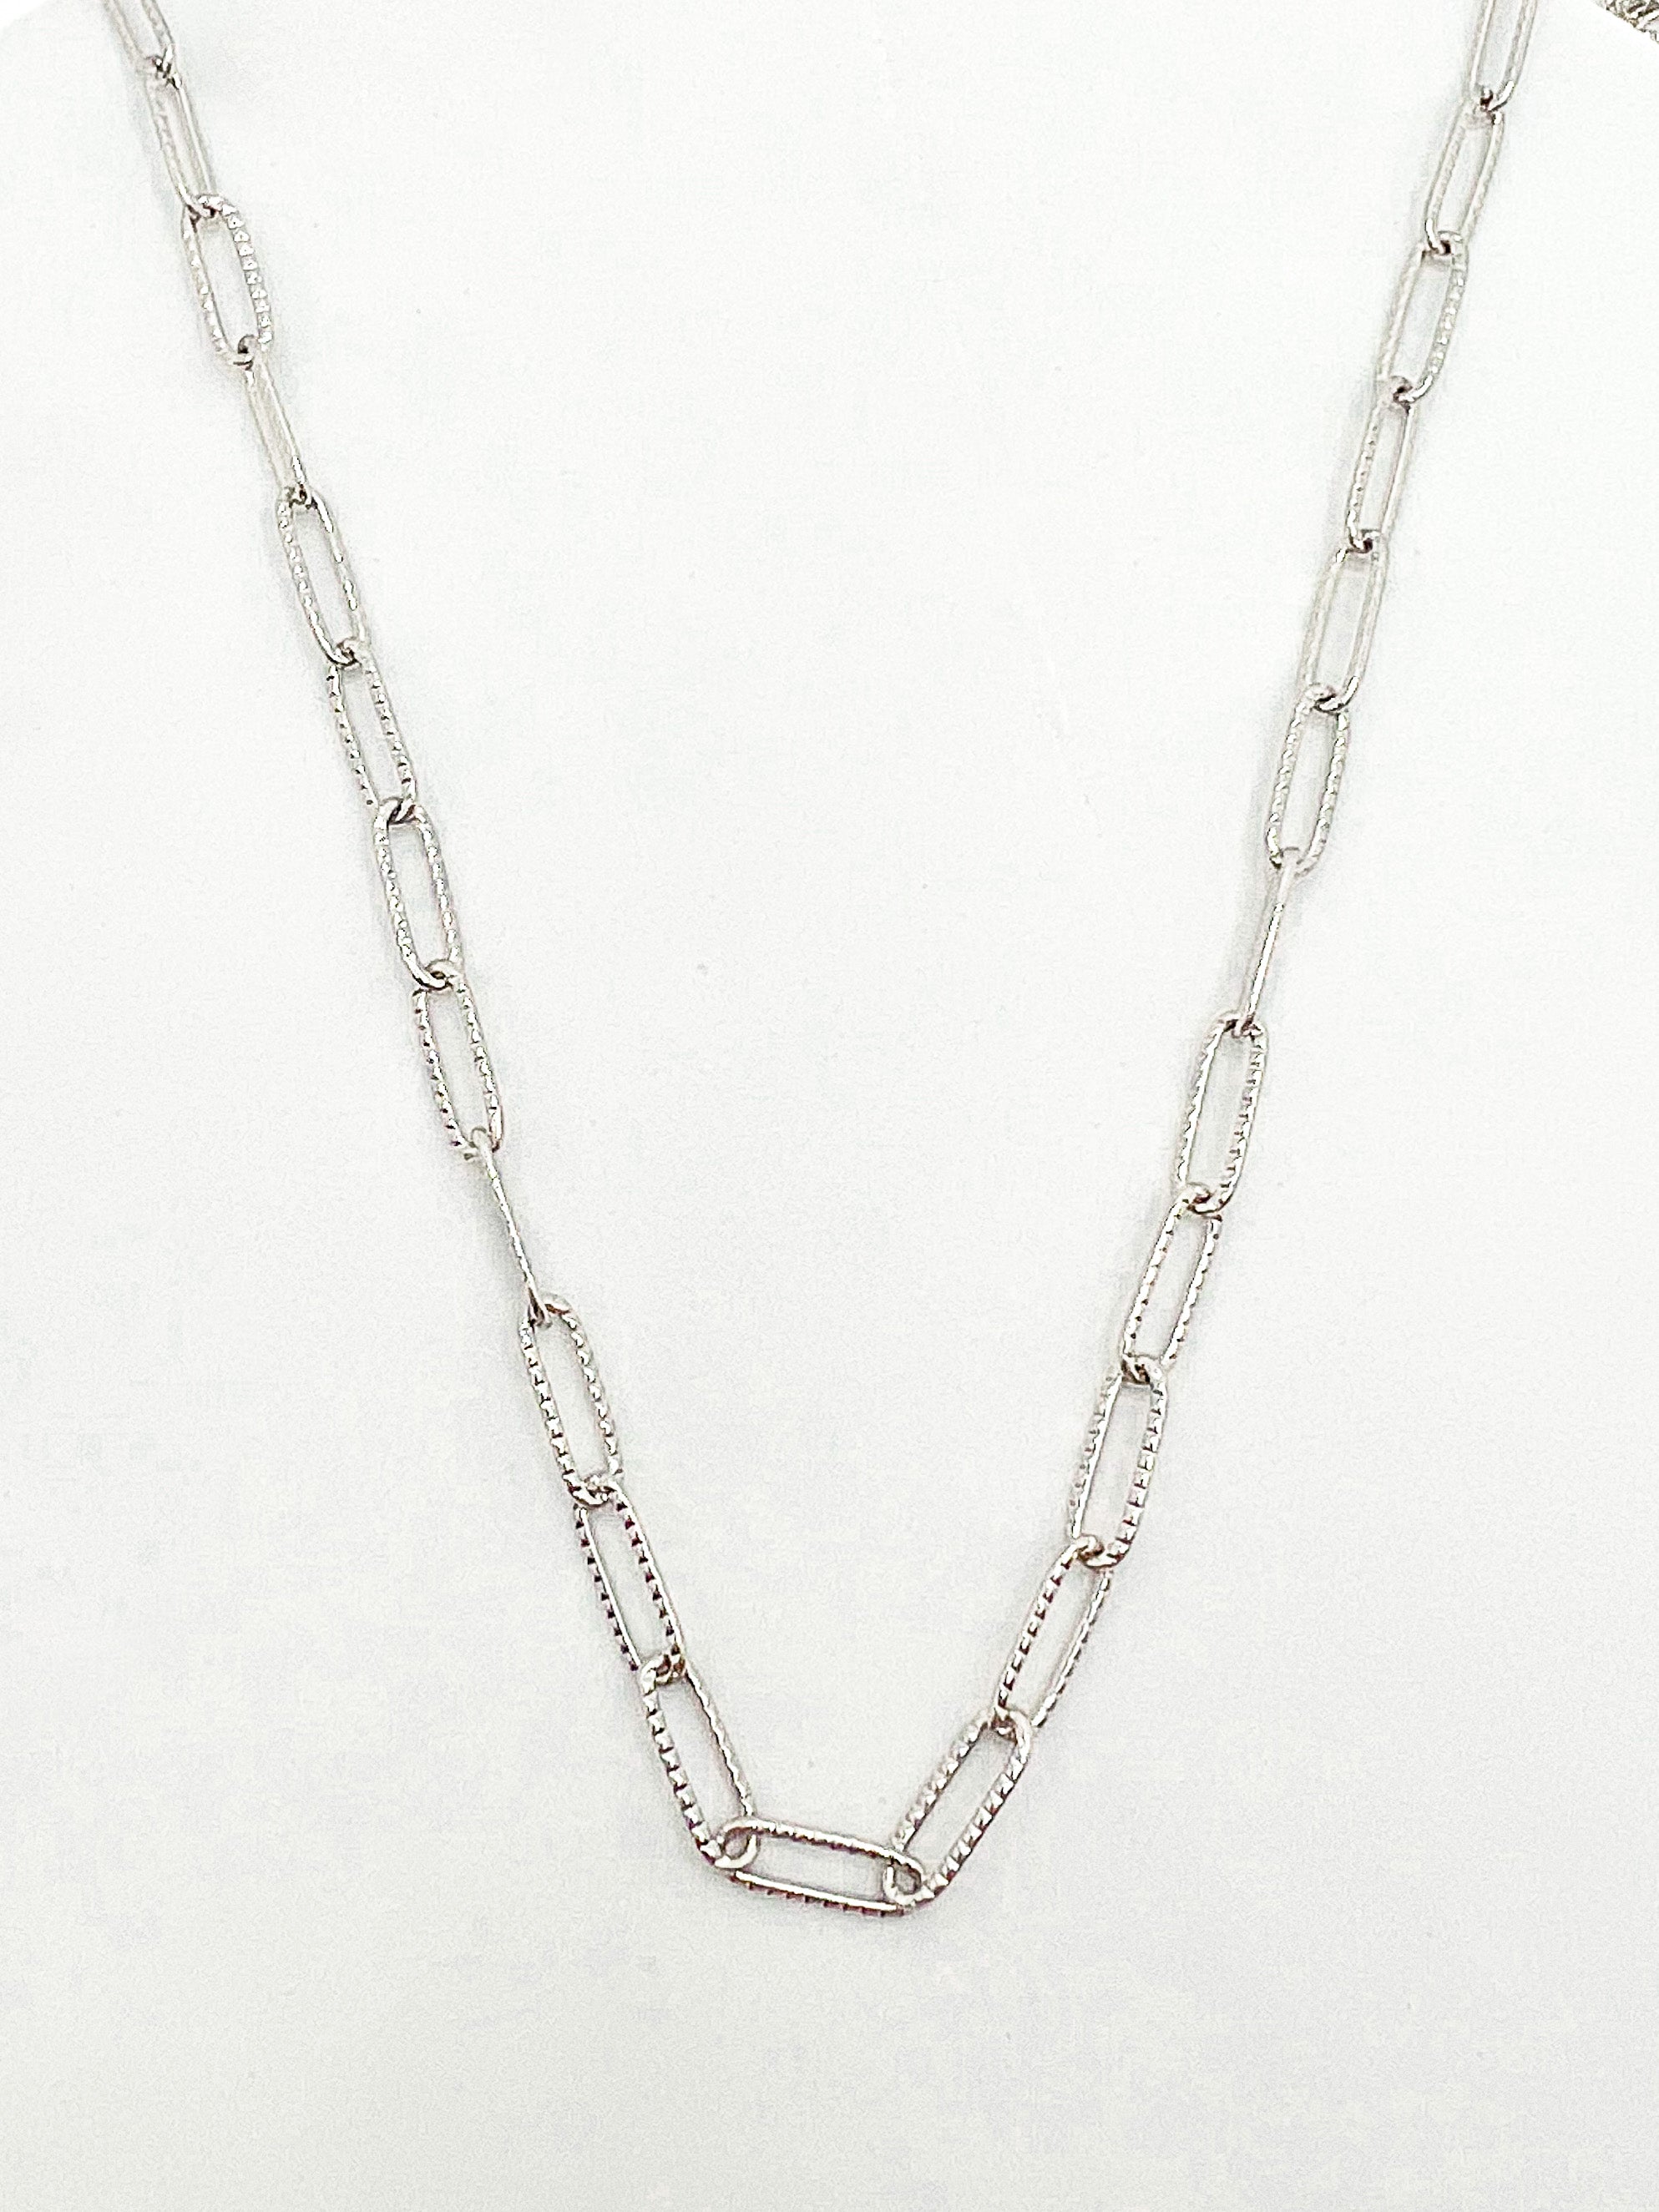 Luxe Links Necklace - For the Girls Jewelry